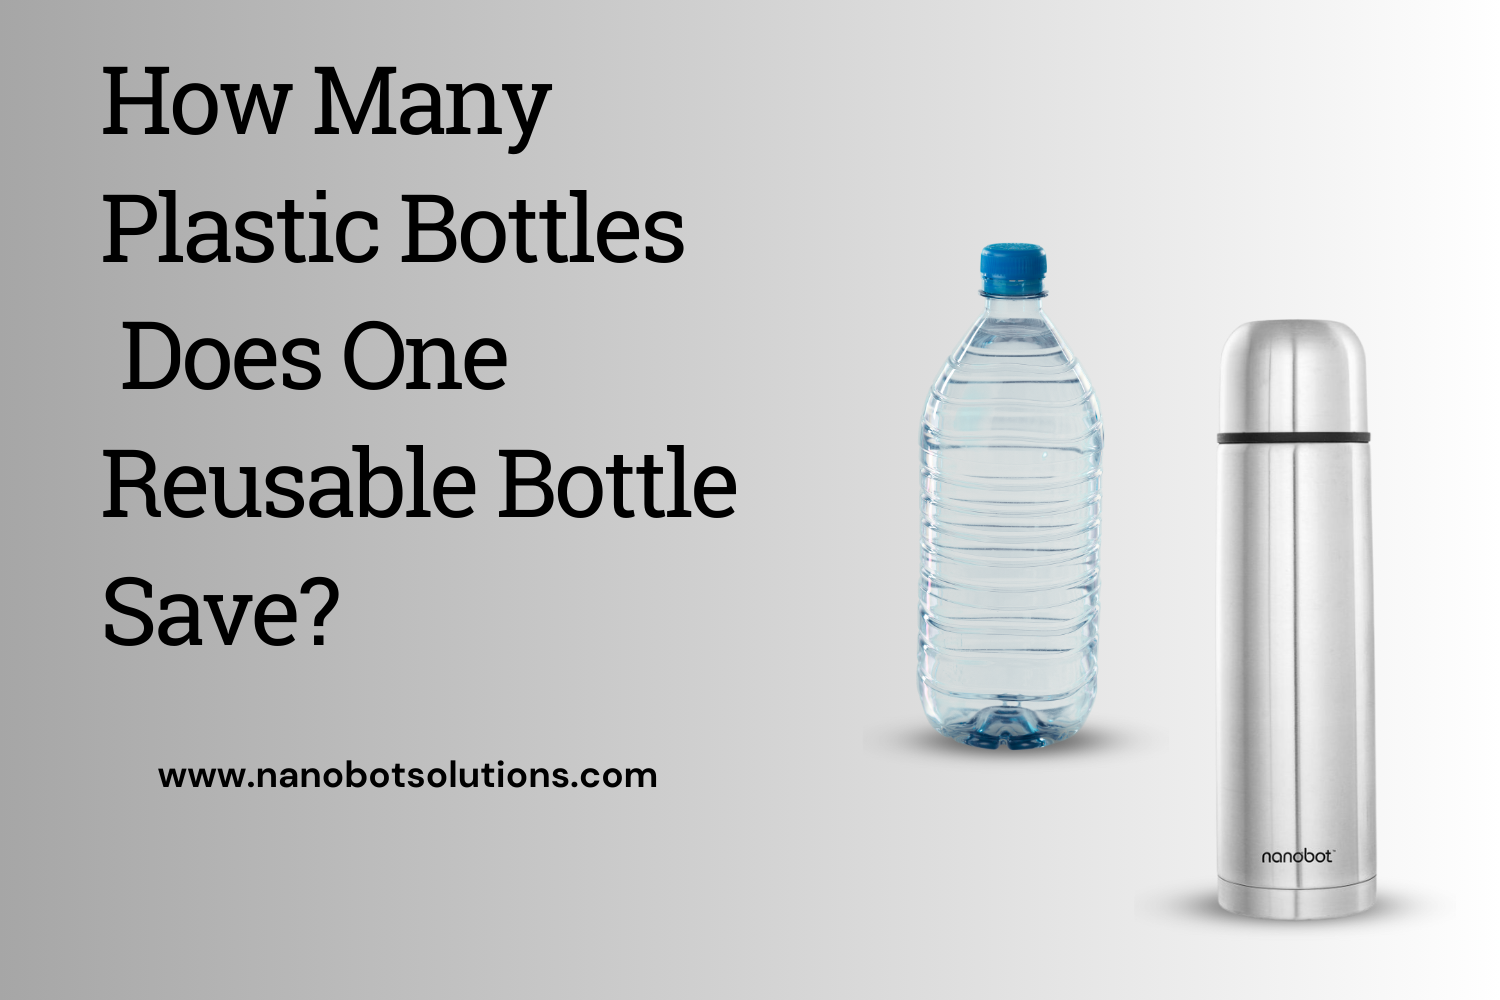 How Many Plastic Bottles Does One Reusable Bottle Save